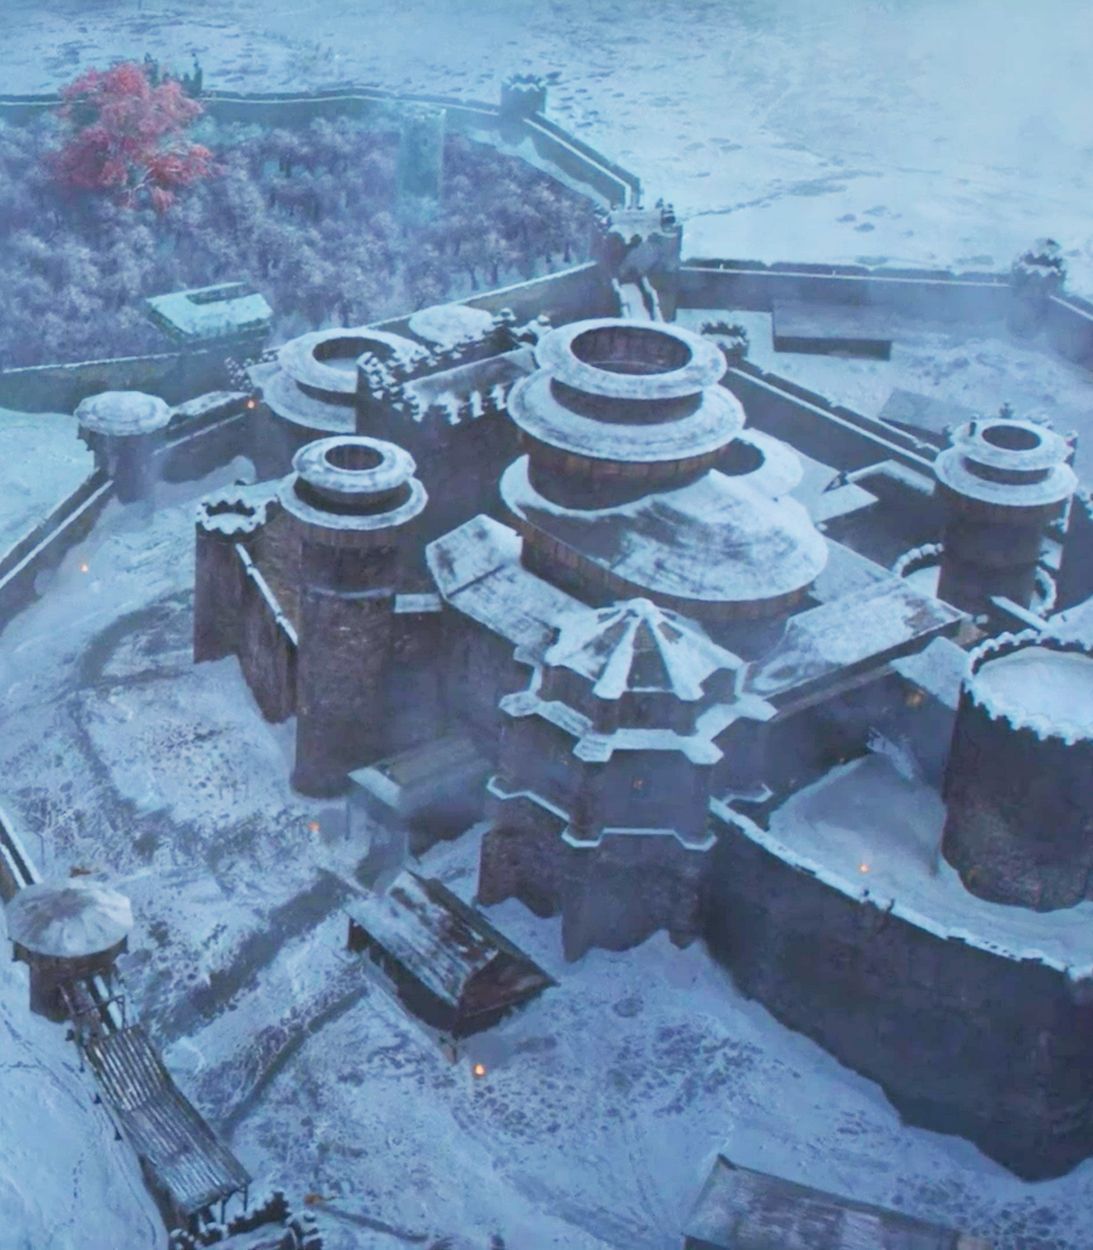 Winterfell in Game of Thrones Vertical